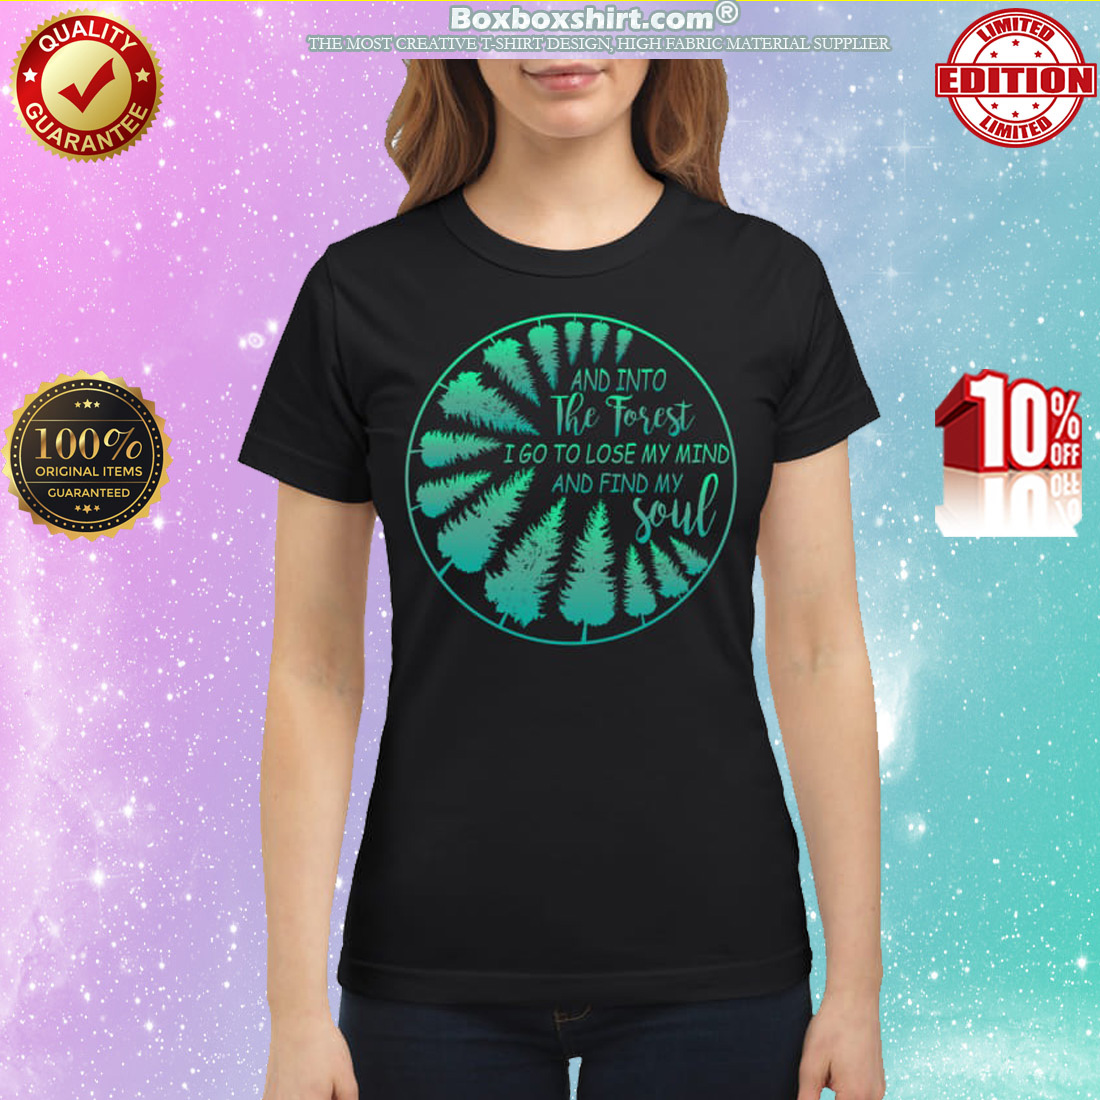 And into the forest I go to lose my mind and find my soul classic shirt